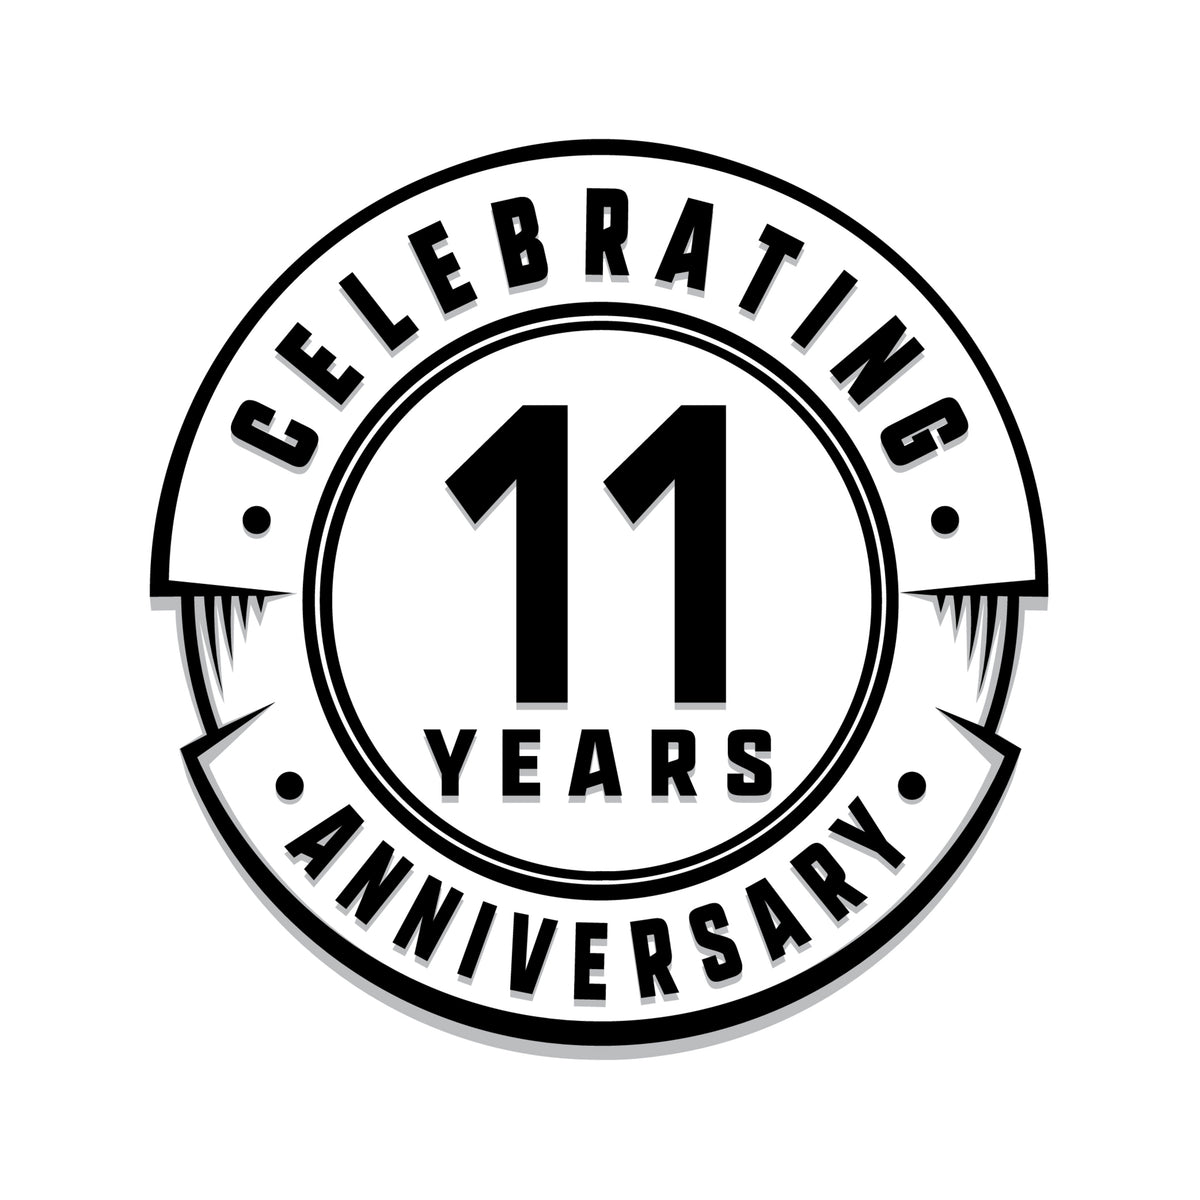 Our 11th Anniversary Sale Newsletter